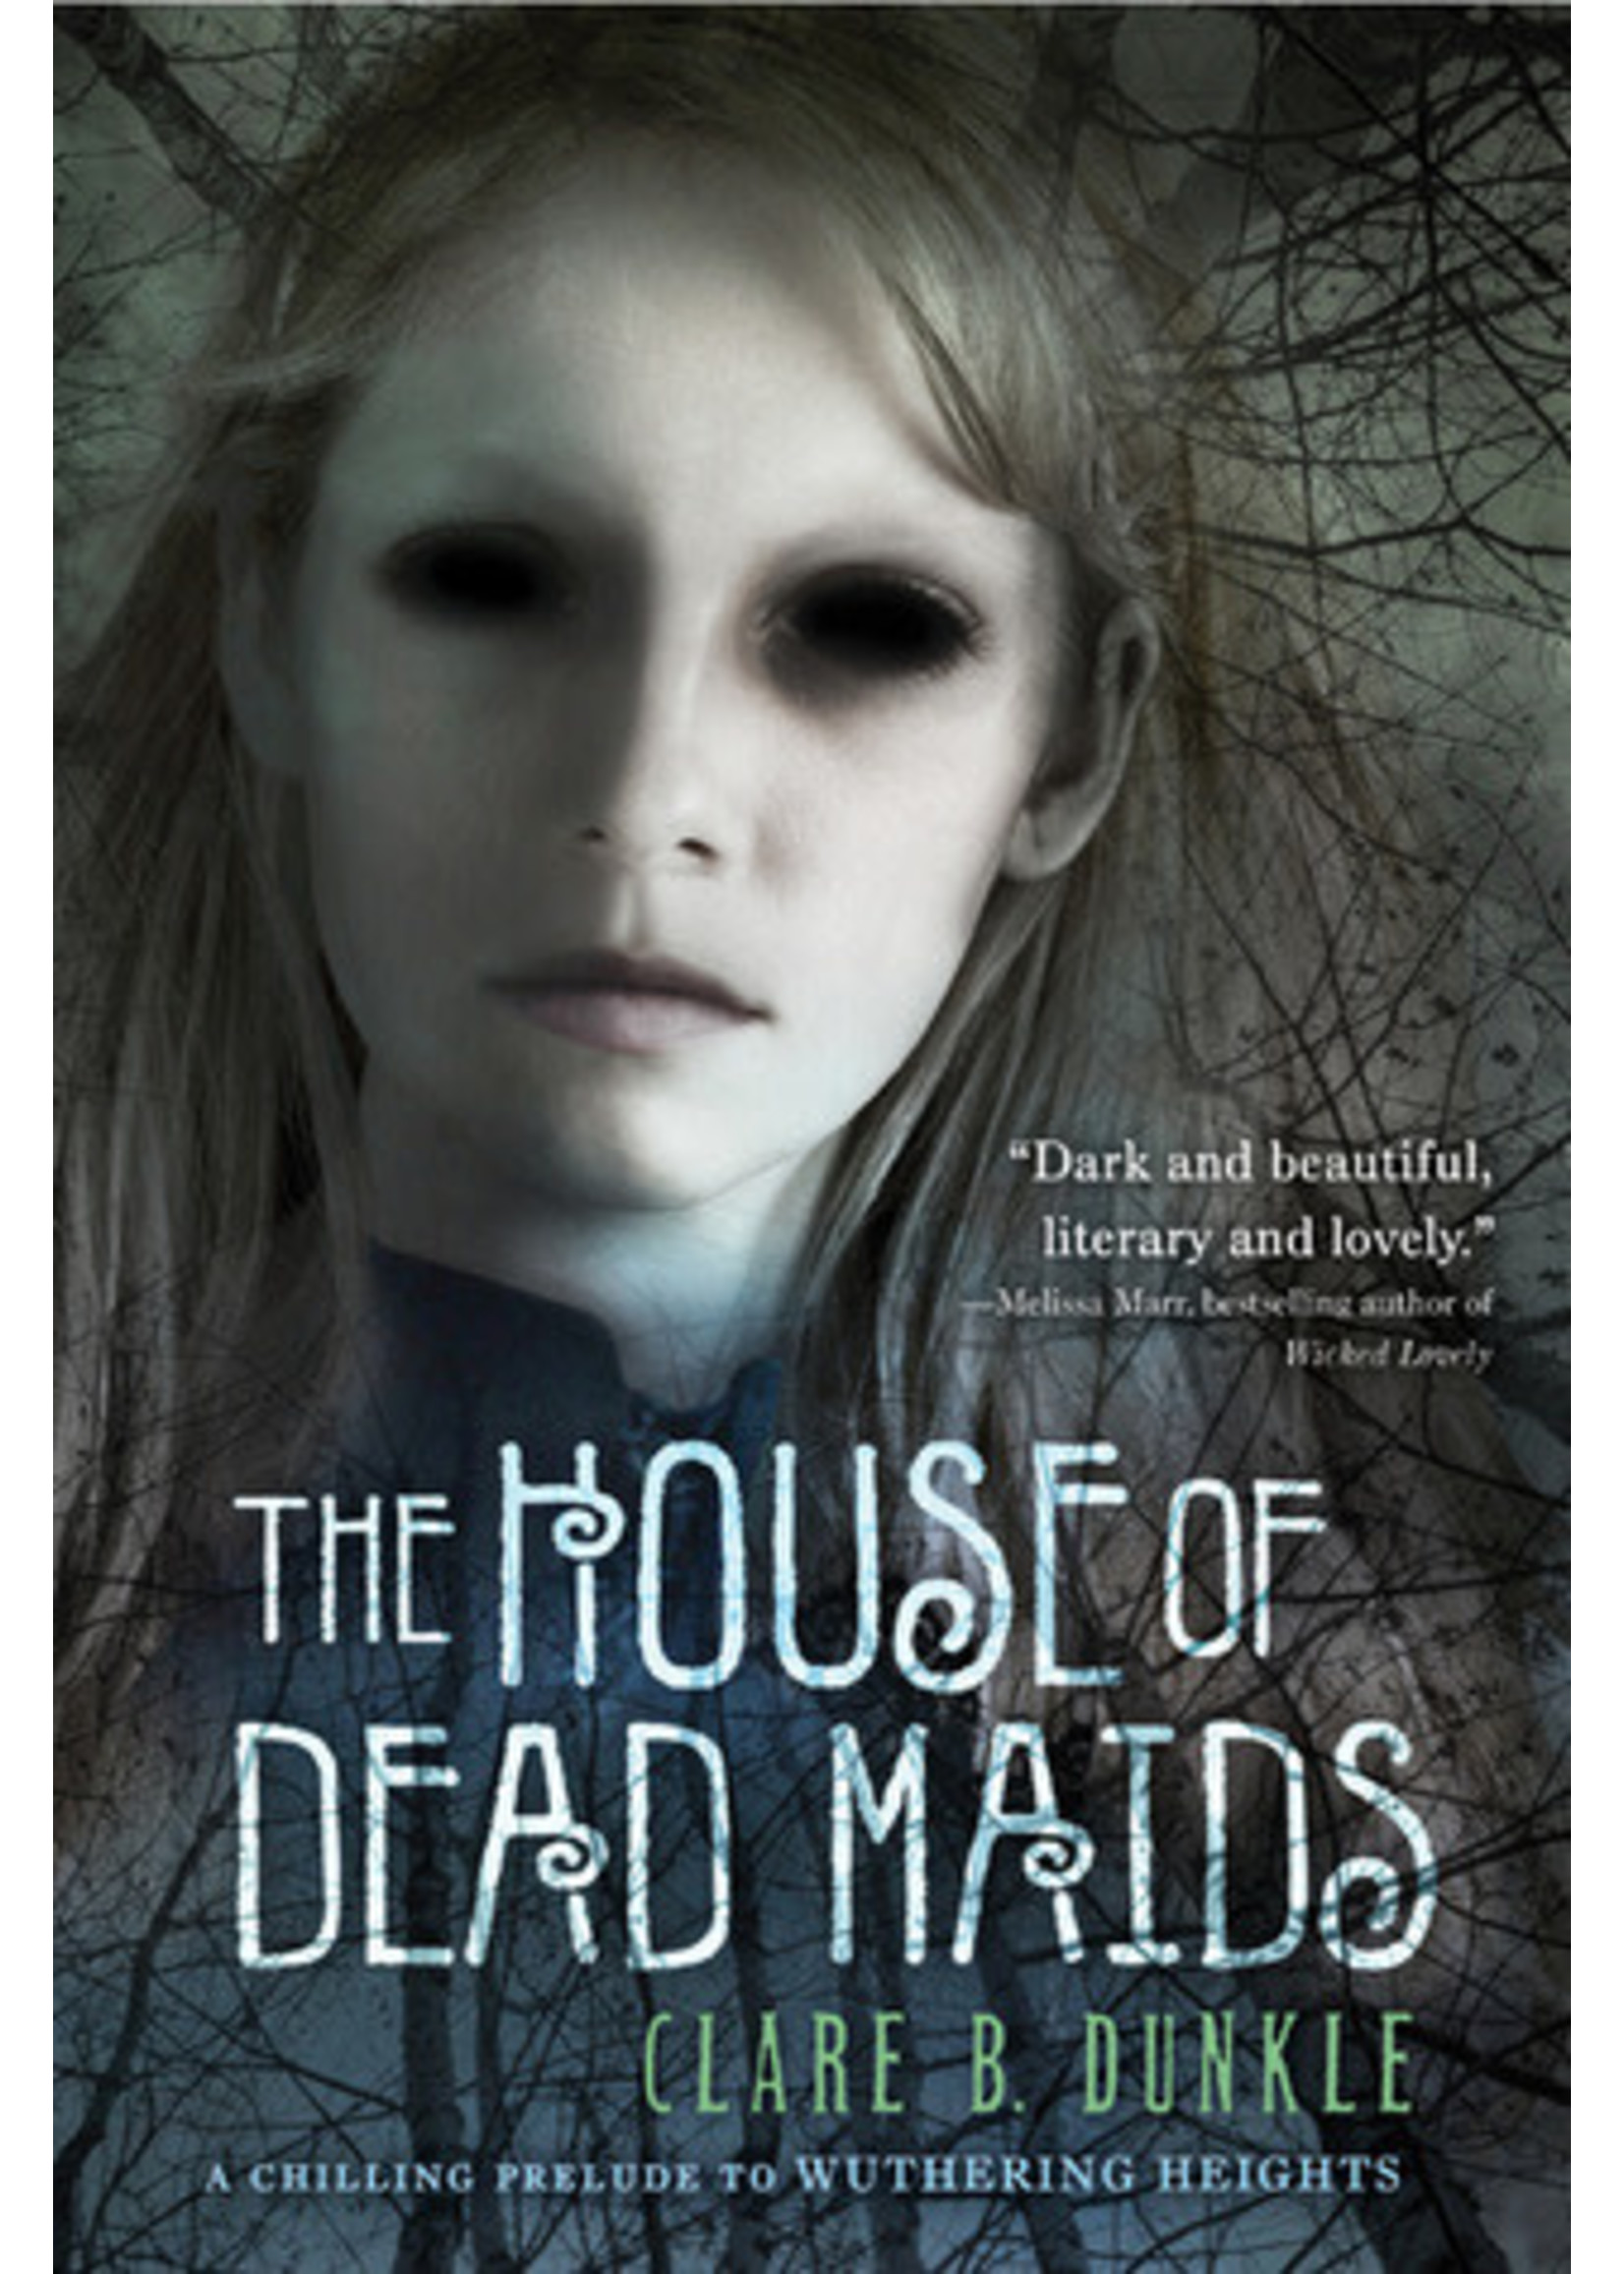 The House of Dead Maids by Clare B. Dunkle, Patrick Arrasmith